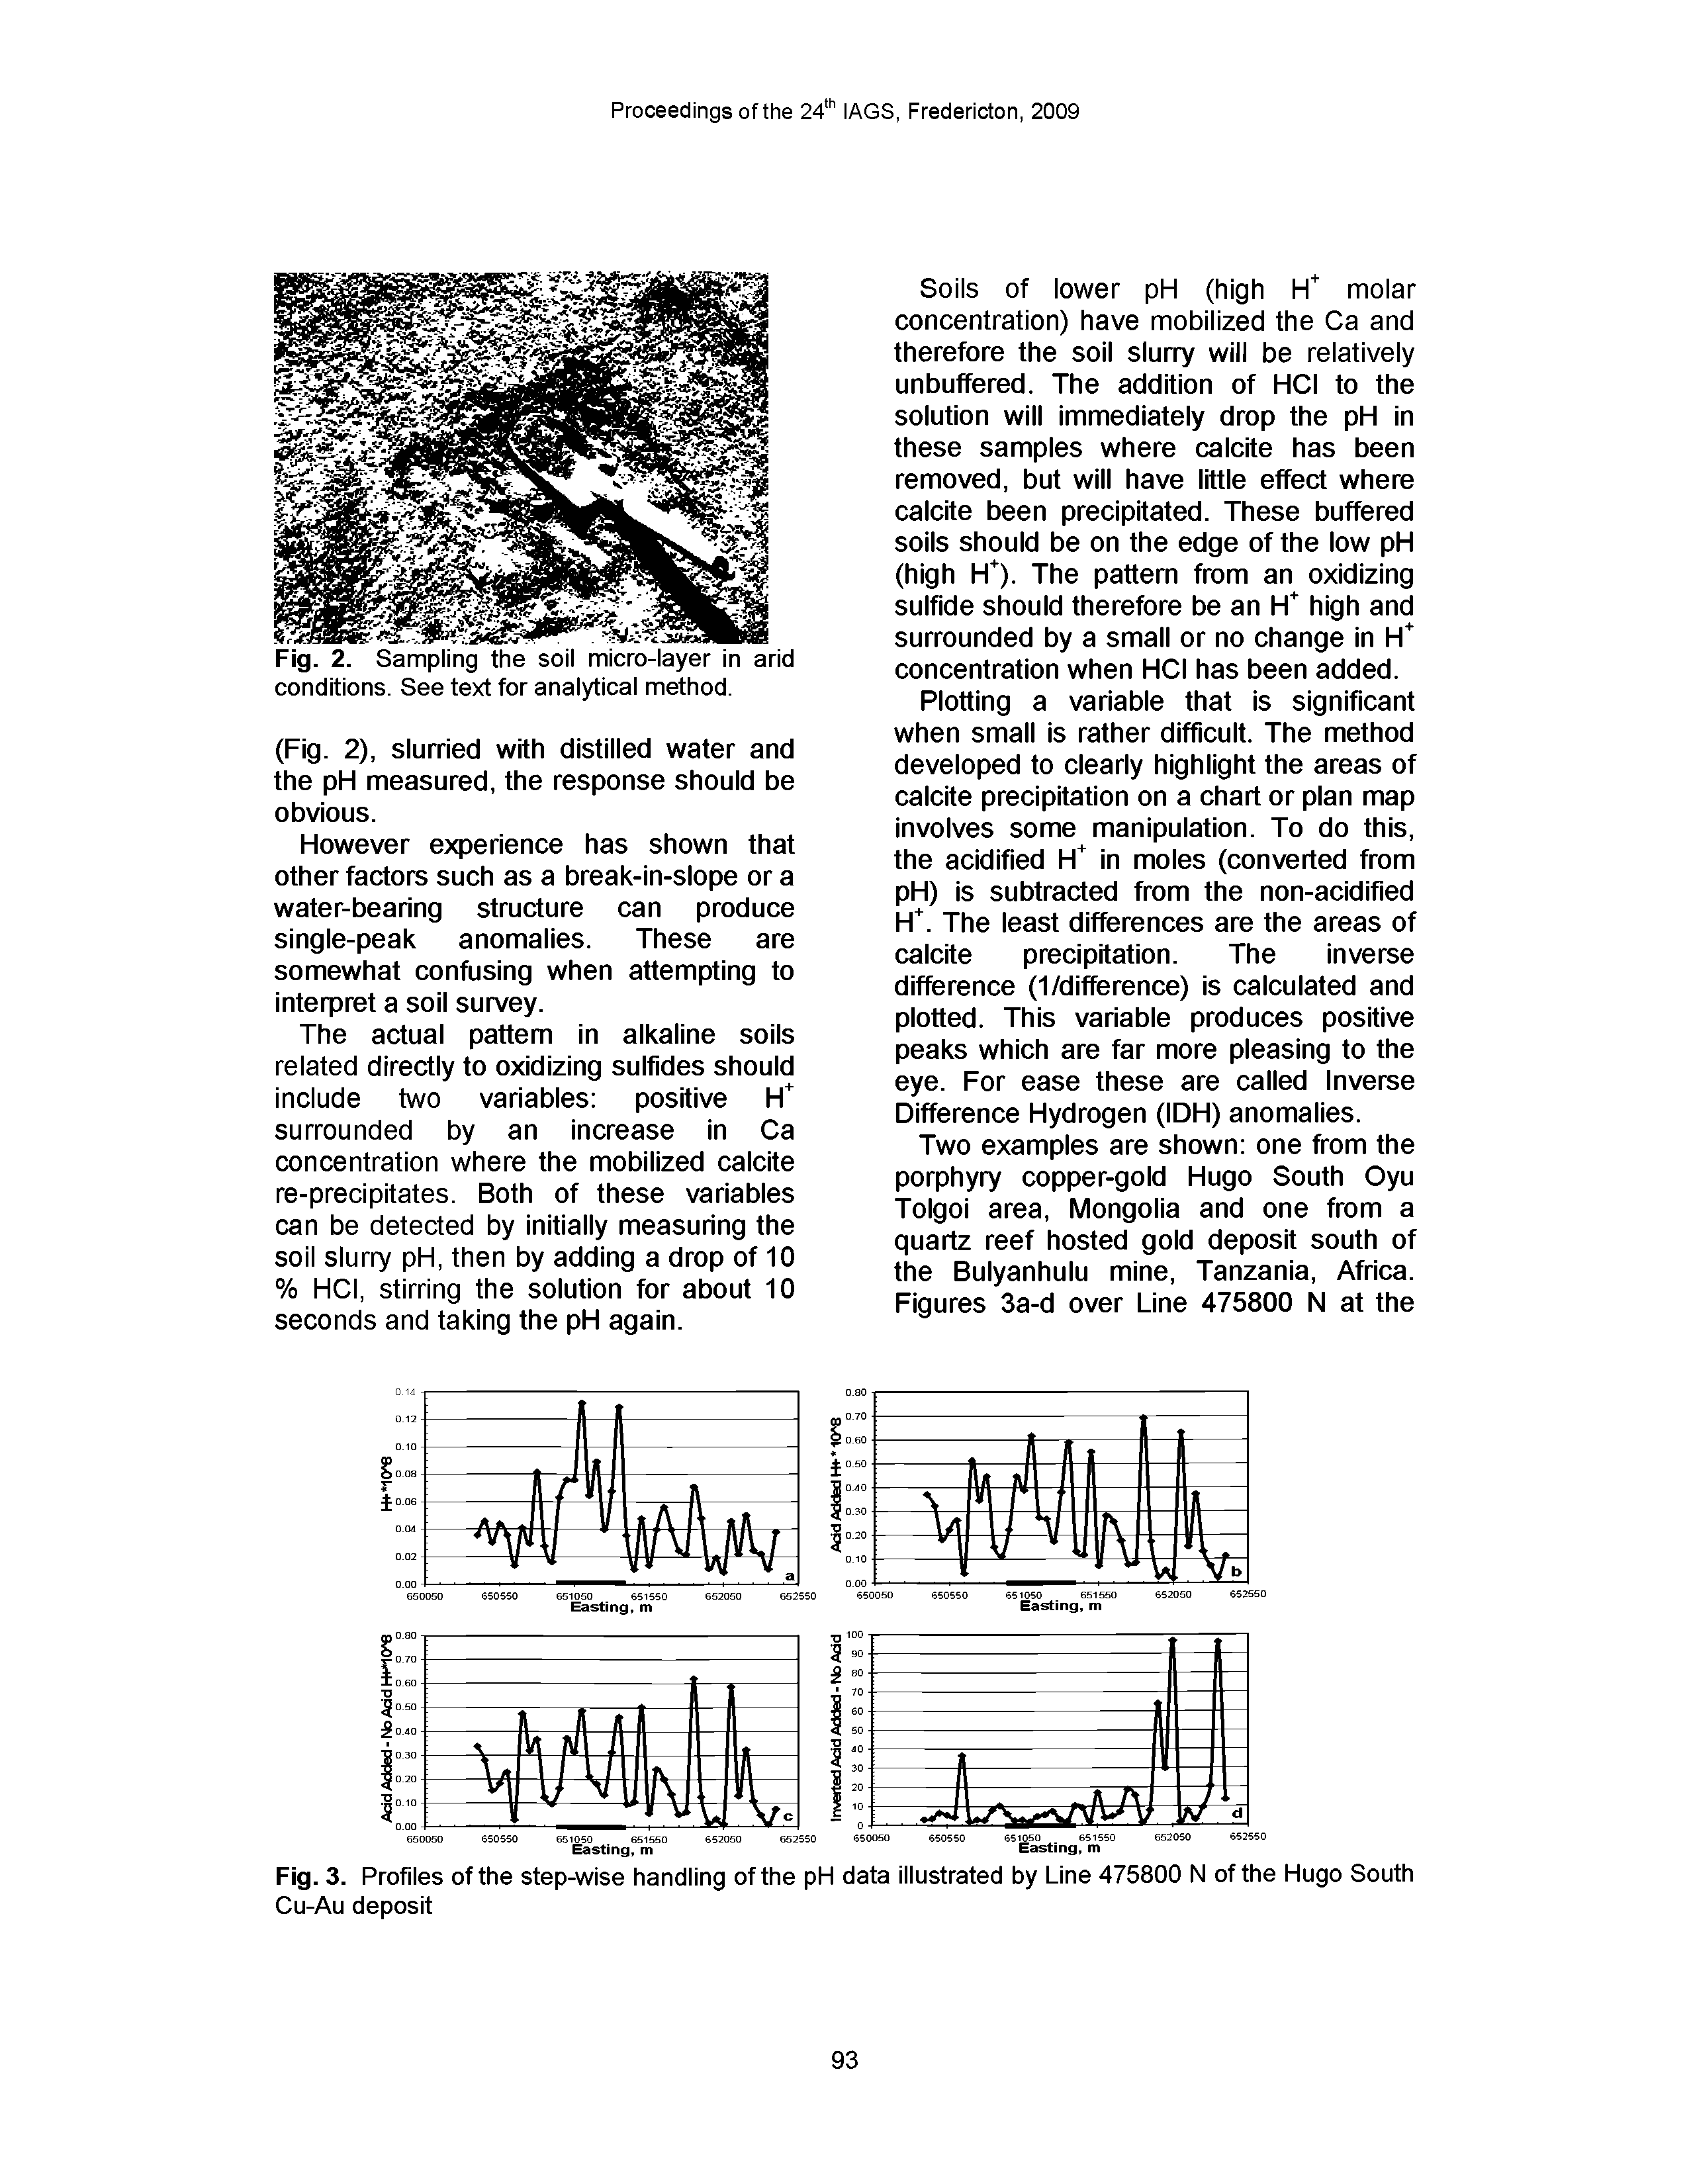 Fig. 2. Sampling the soil micro-layer in arid conditions. See text for analytical method.